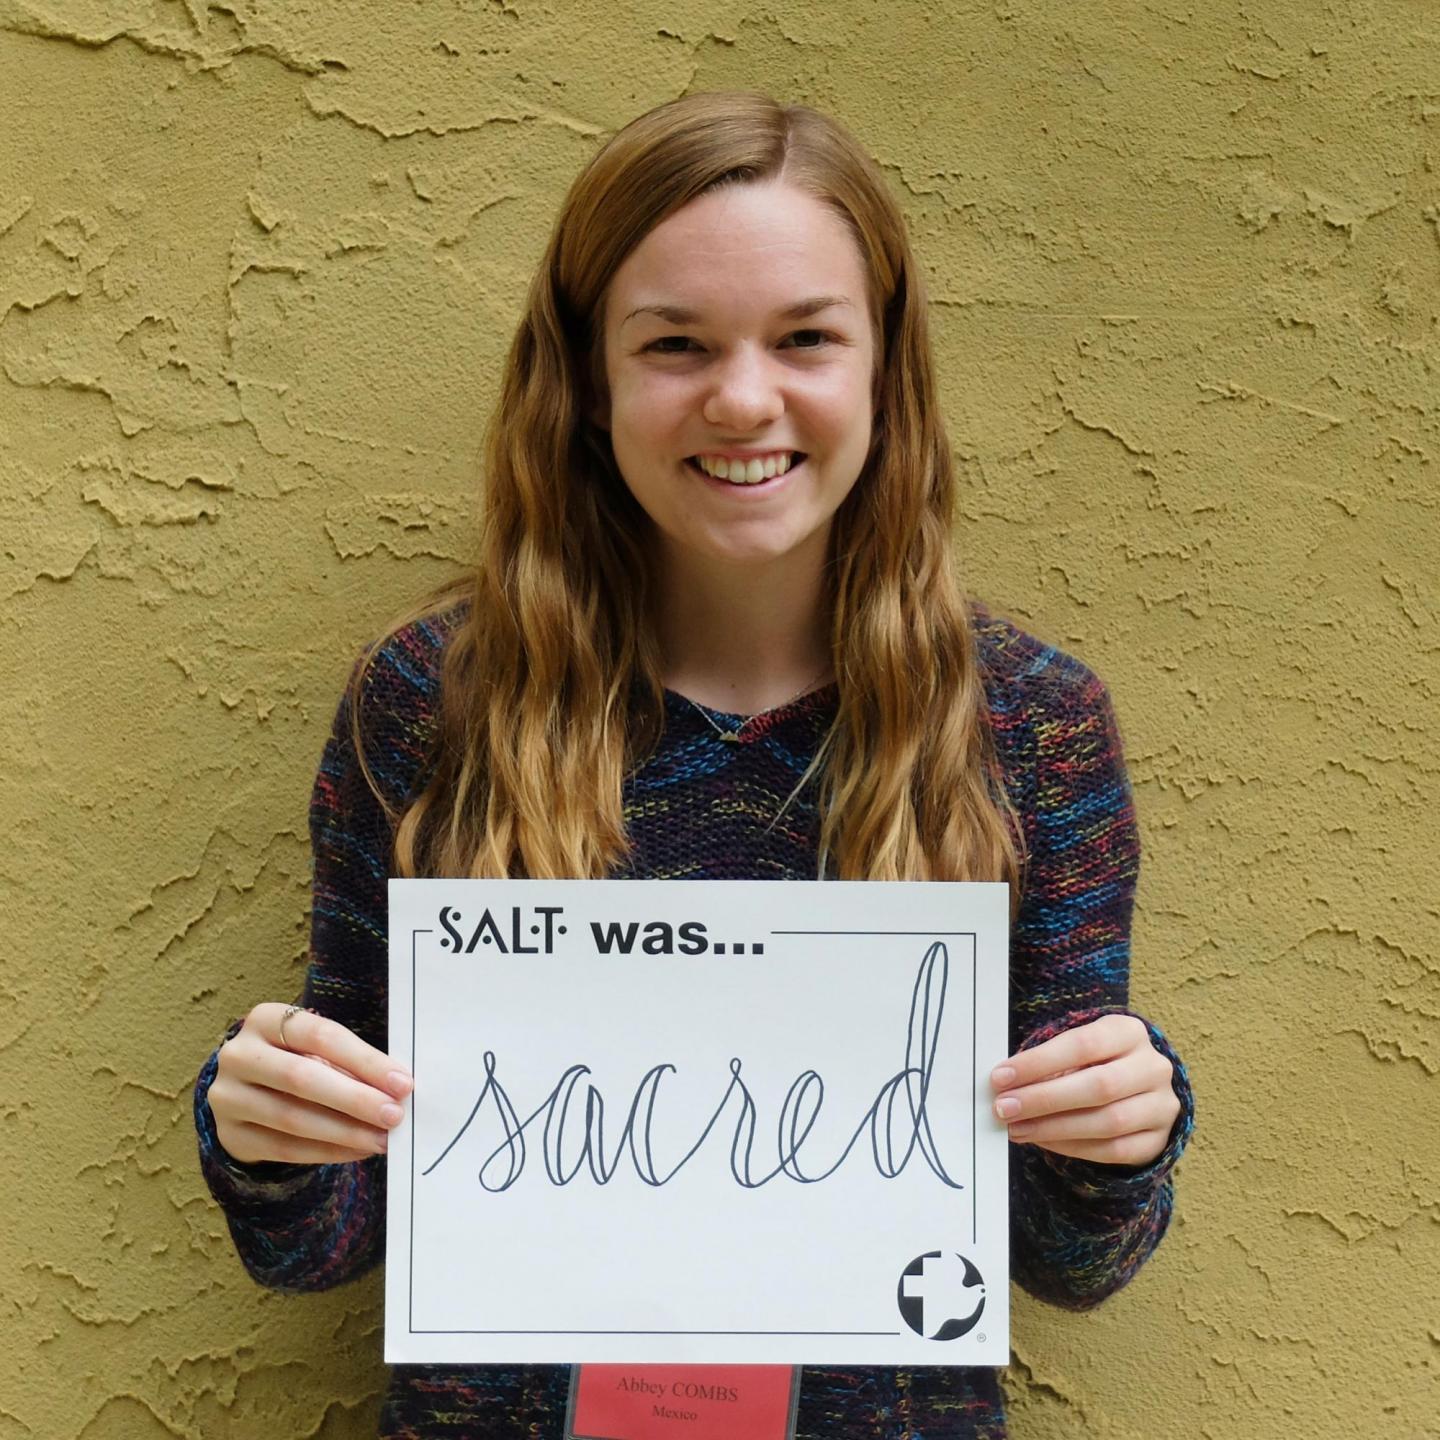 A young adult stands in front of a yellow wall and holds a sign that says, "SALT was sacred"